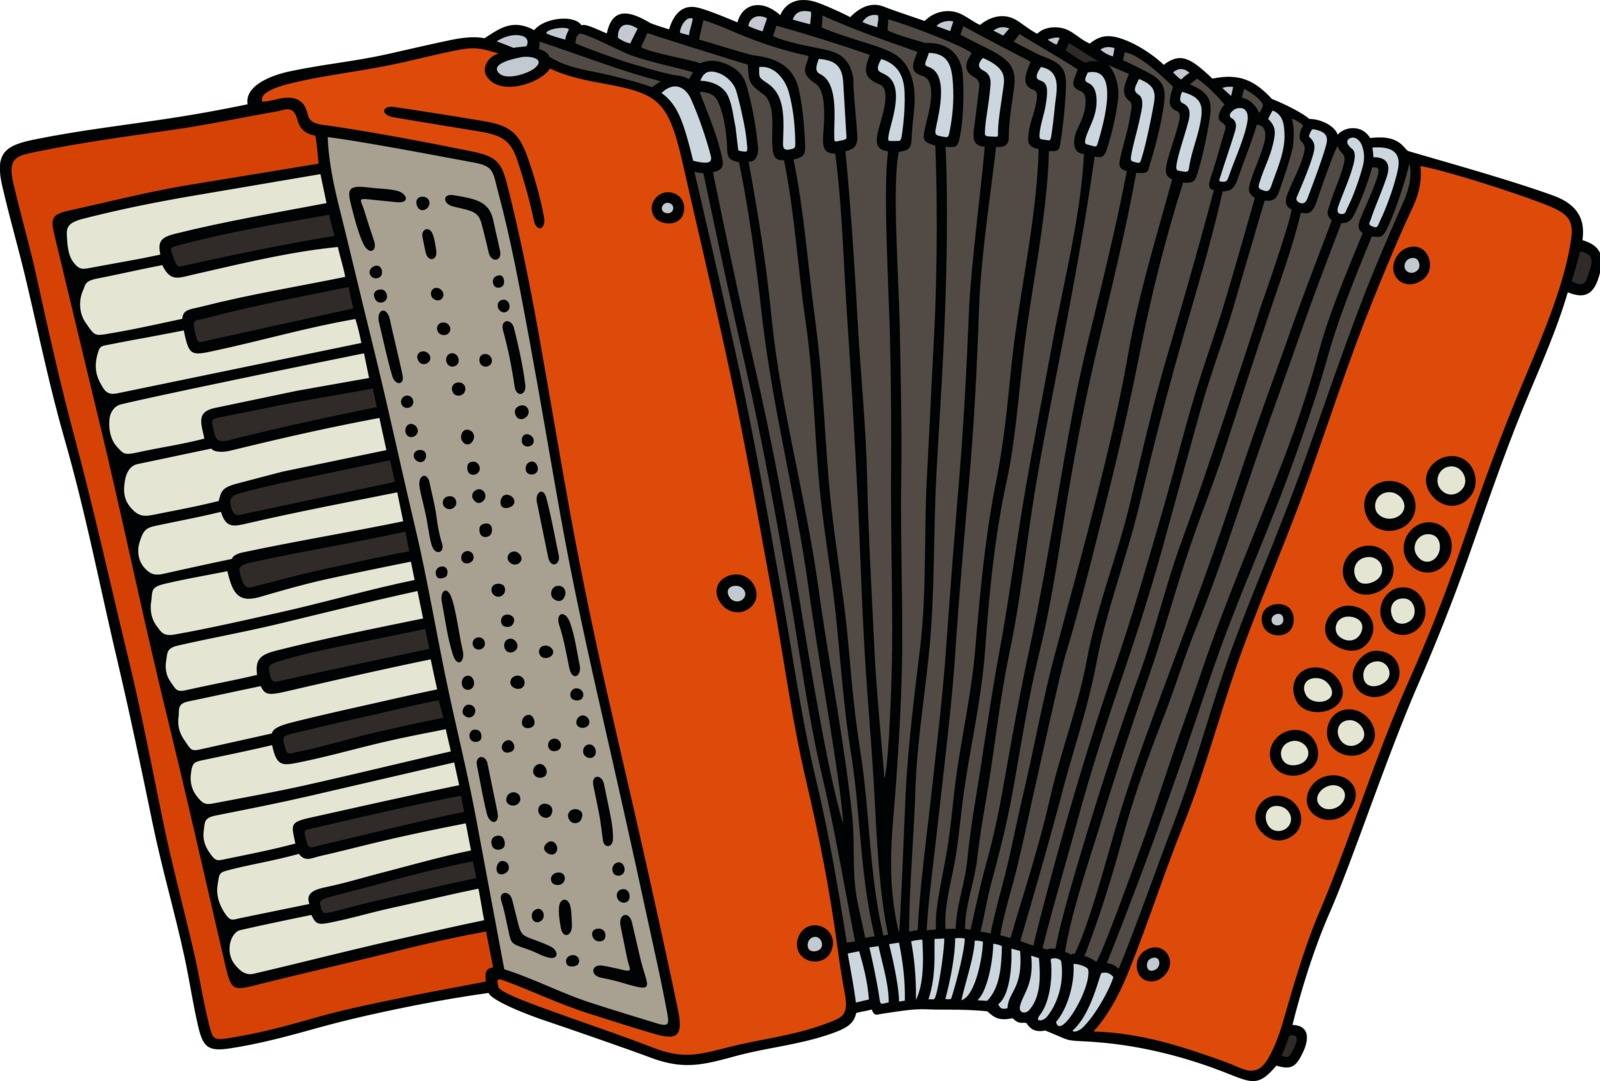 Hand drawing of a classic red accordion